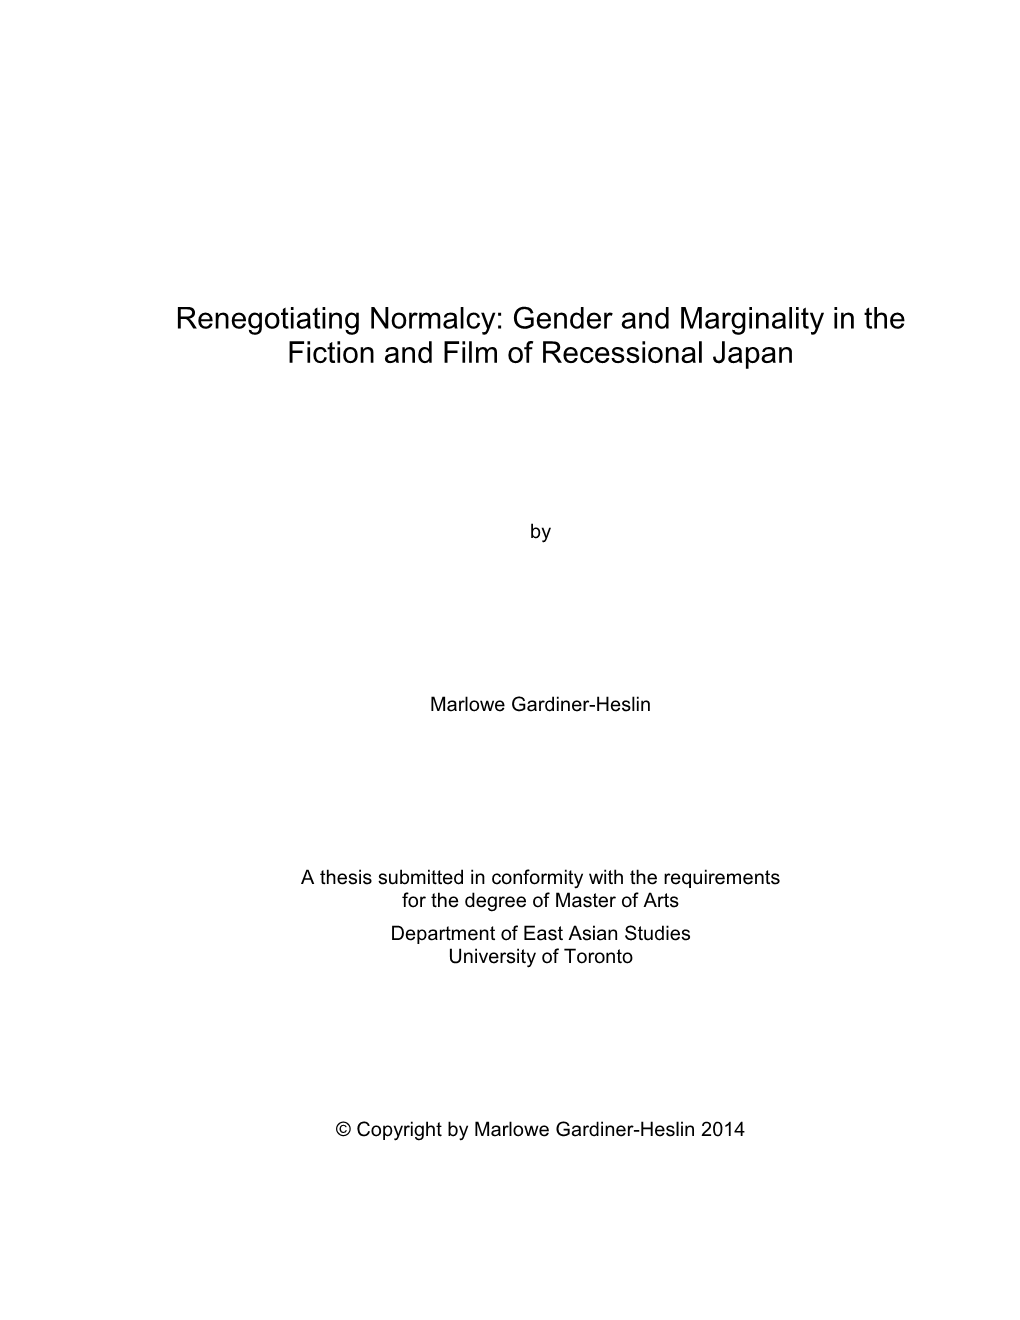 Renegotiating Normalcy: Gender and Marginality in the Fiction and Film of Recessional Japan